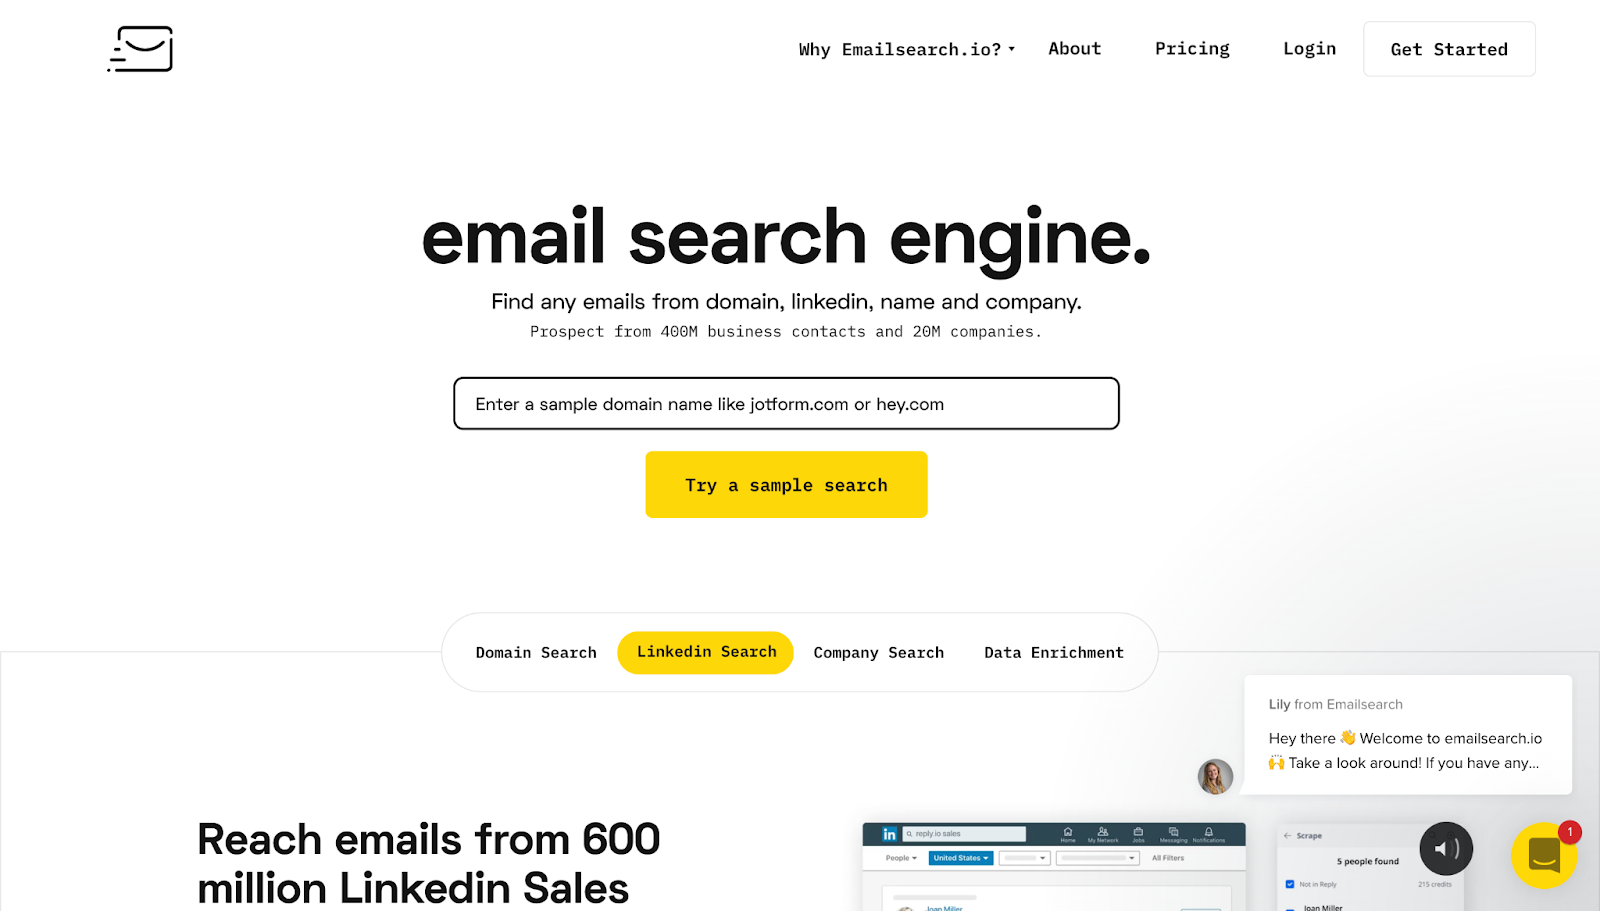 EmailSearch.io